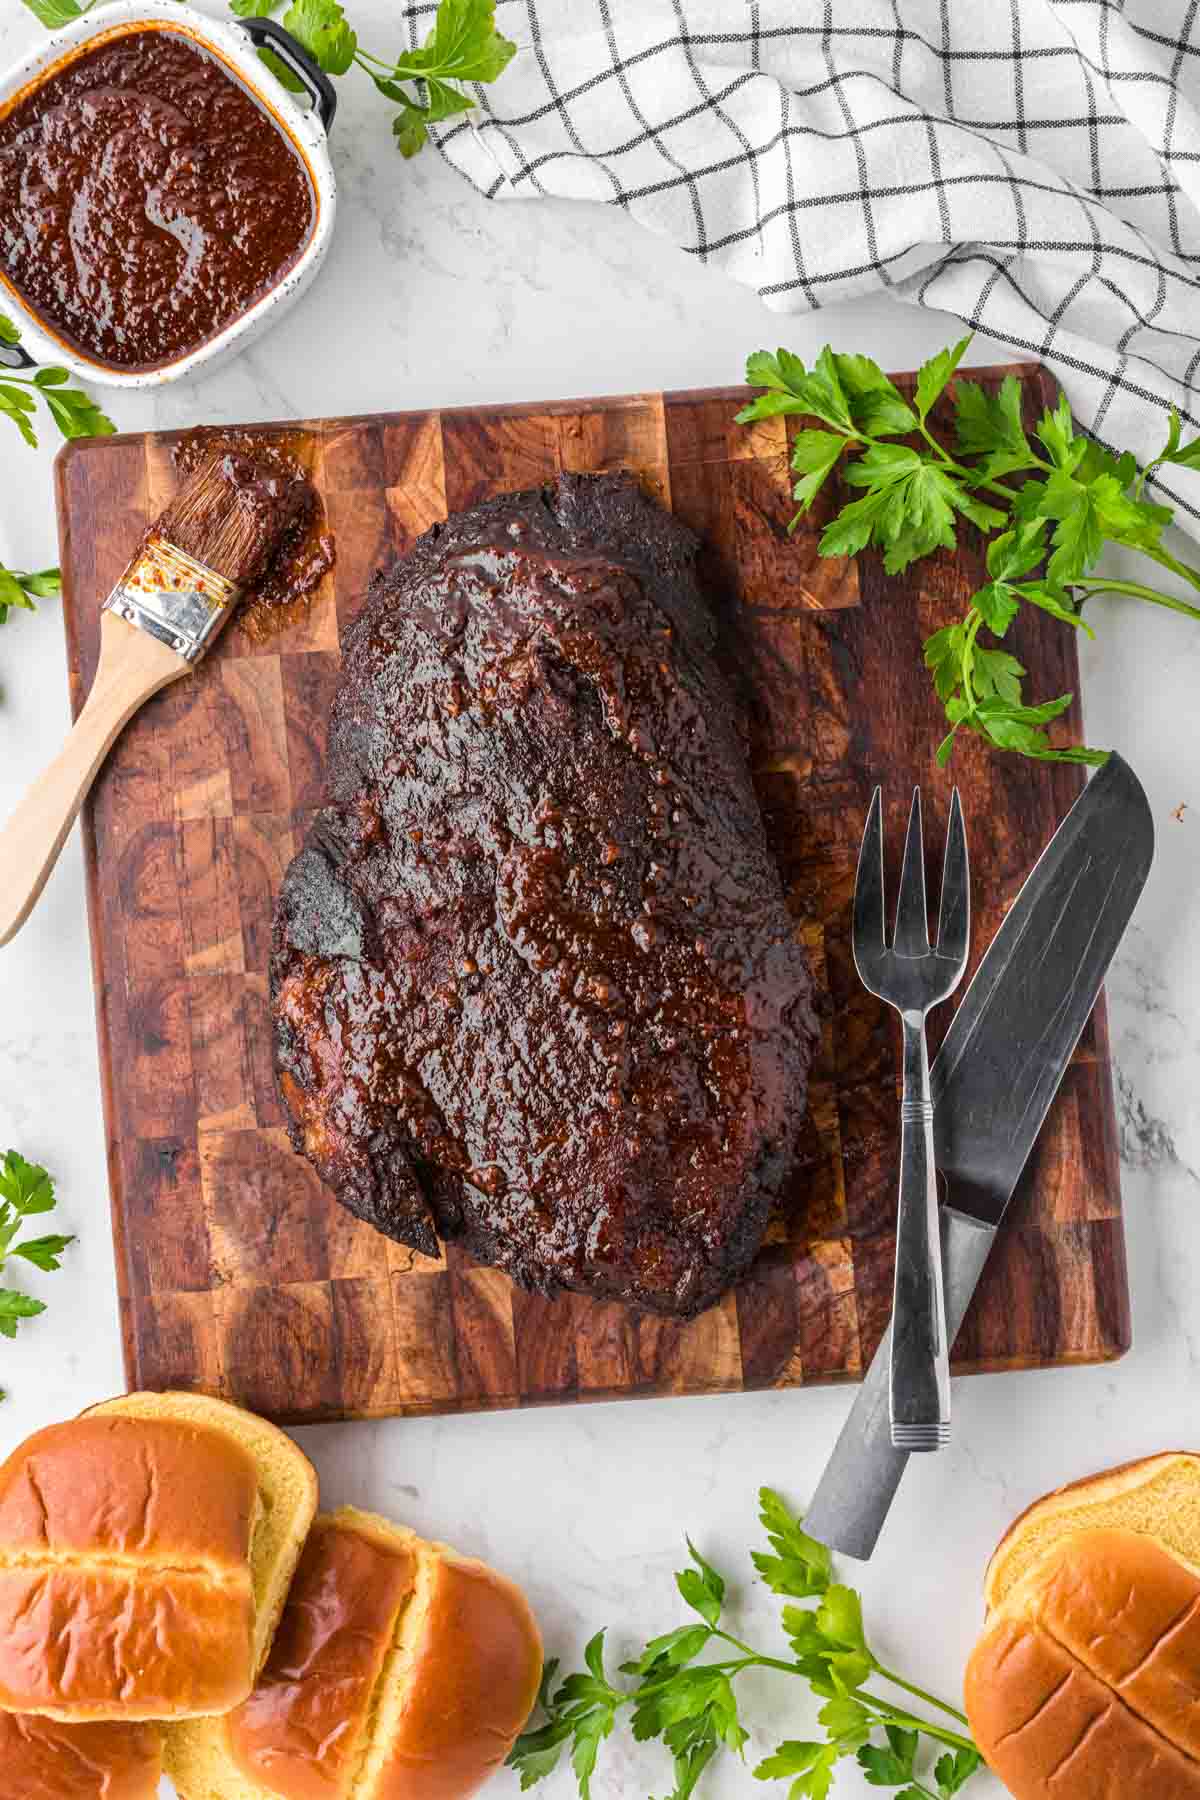 A whole slow cooked beef brisket with bbq sauce on a wooden cutting board.